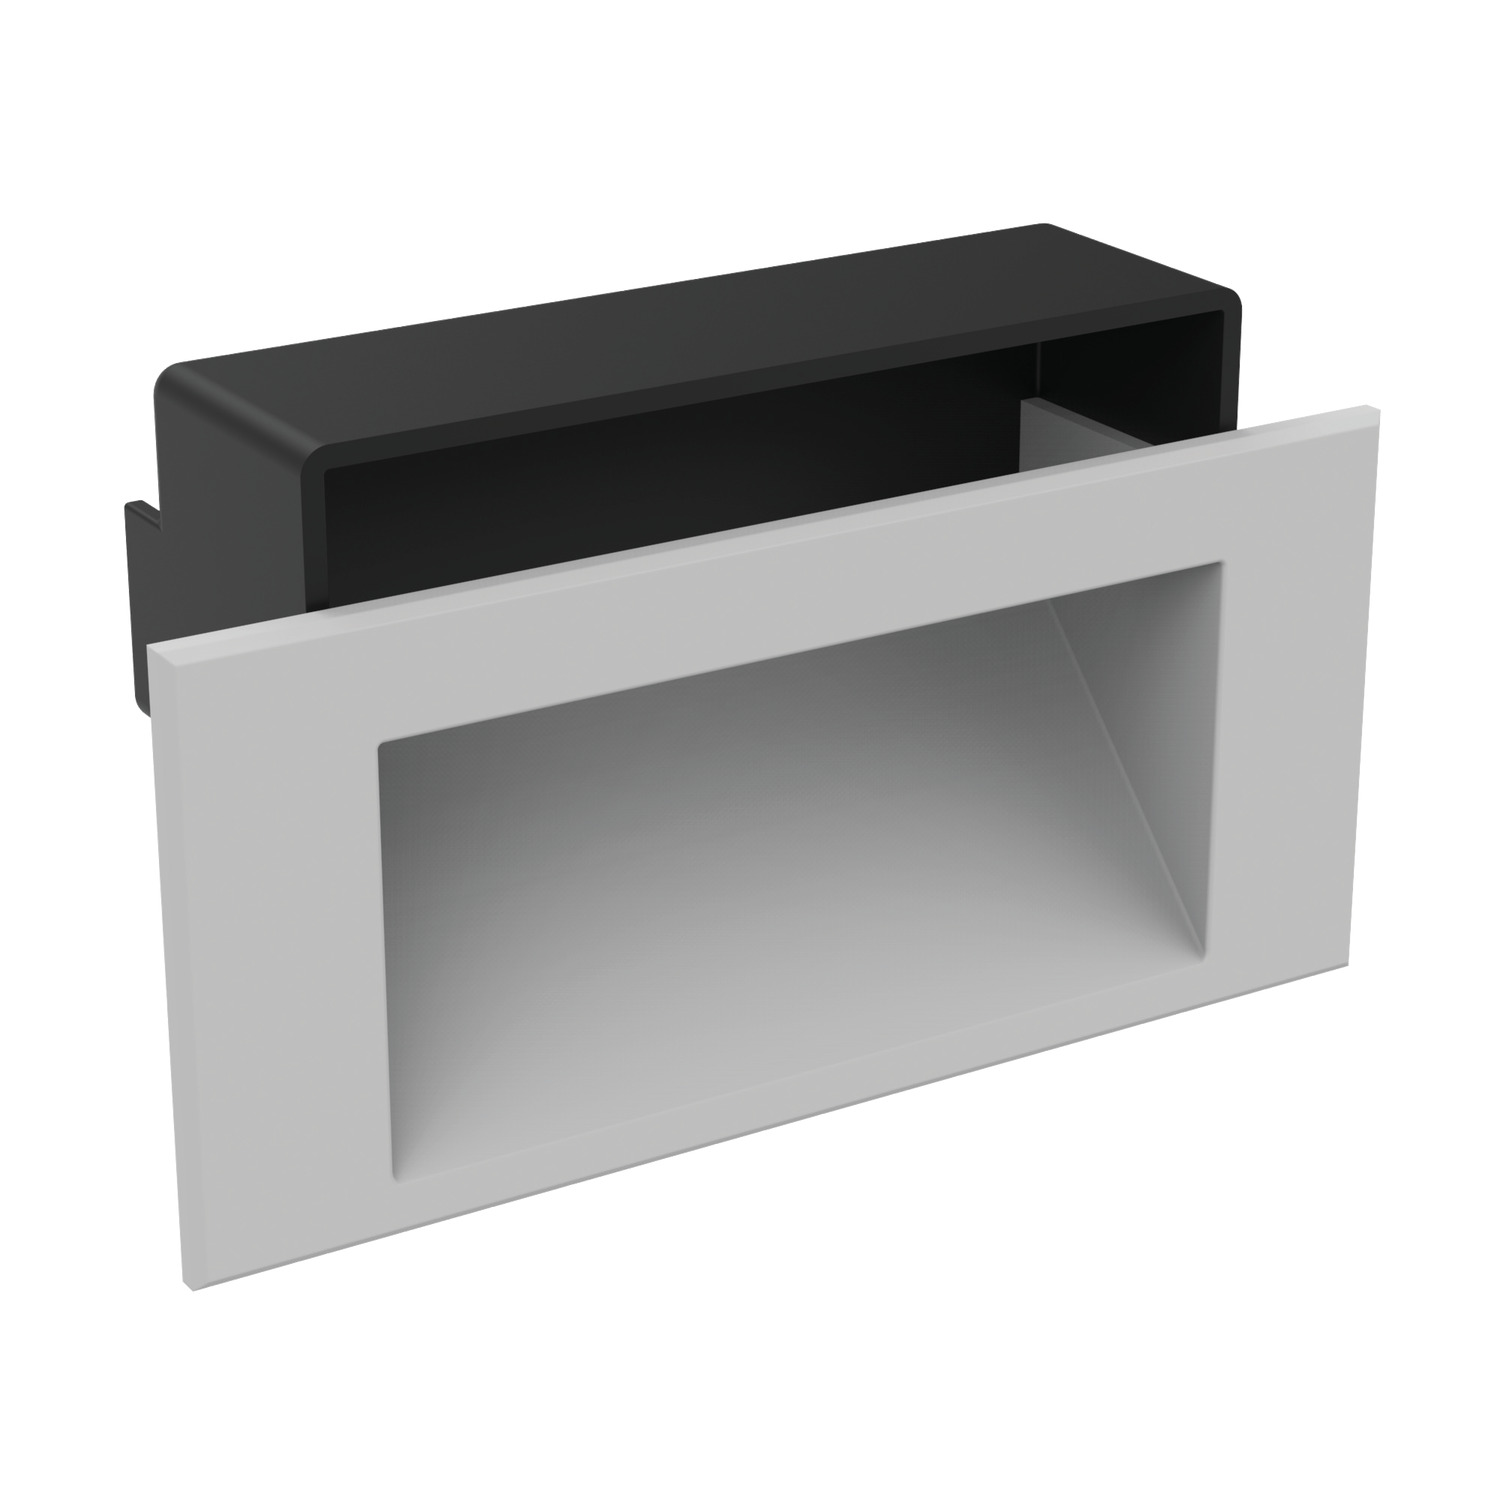 79520.W0107 Recessed Pull Handles Stone grey. Also known as U5520.AC0107